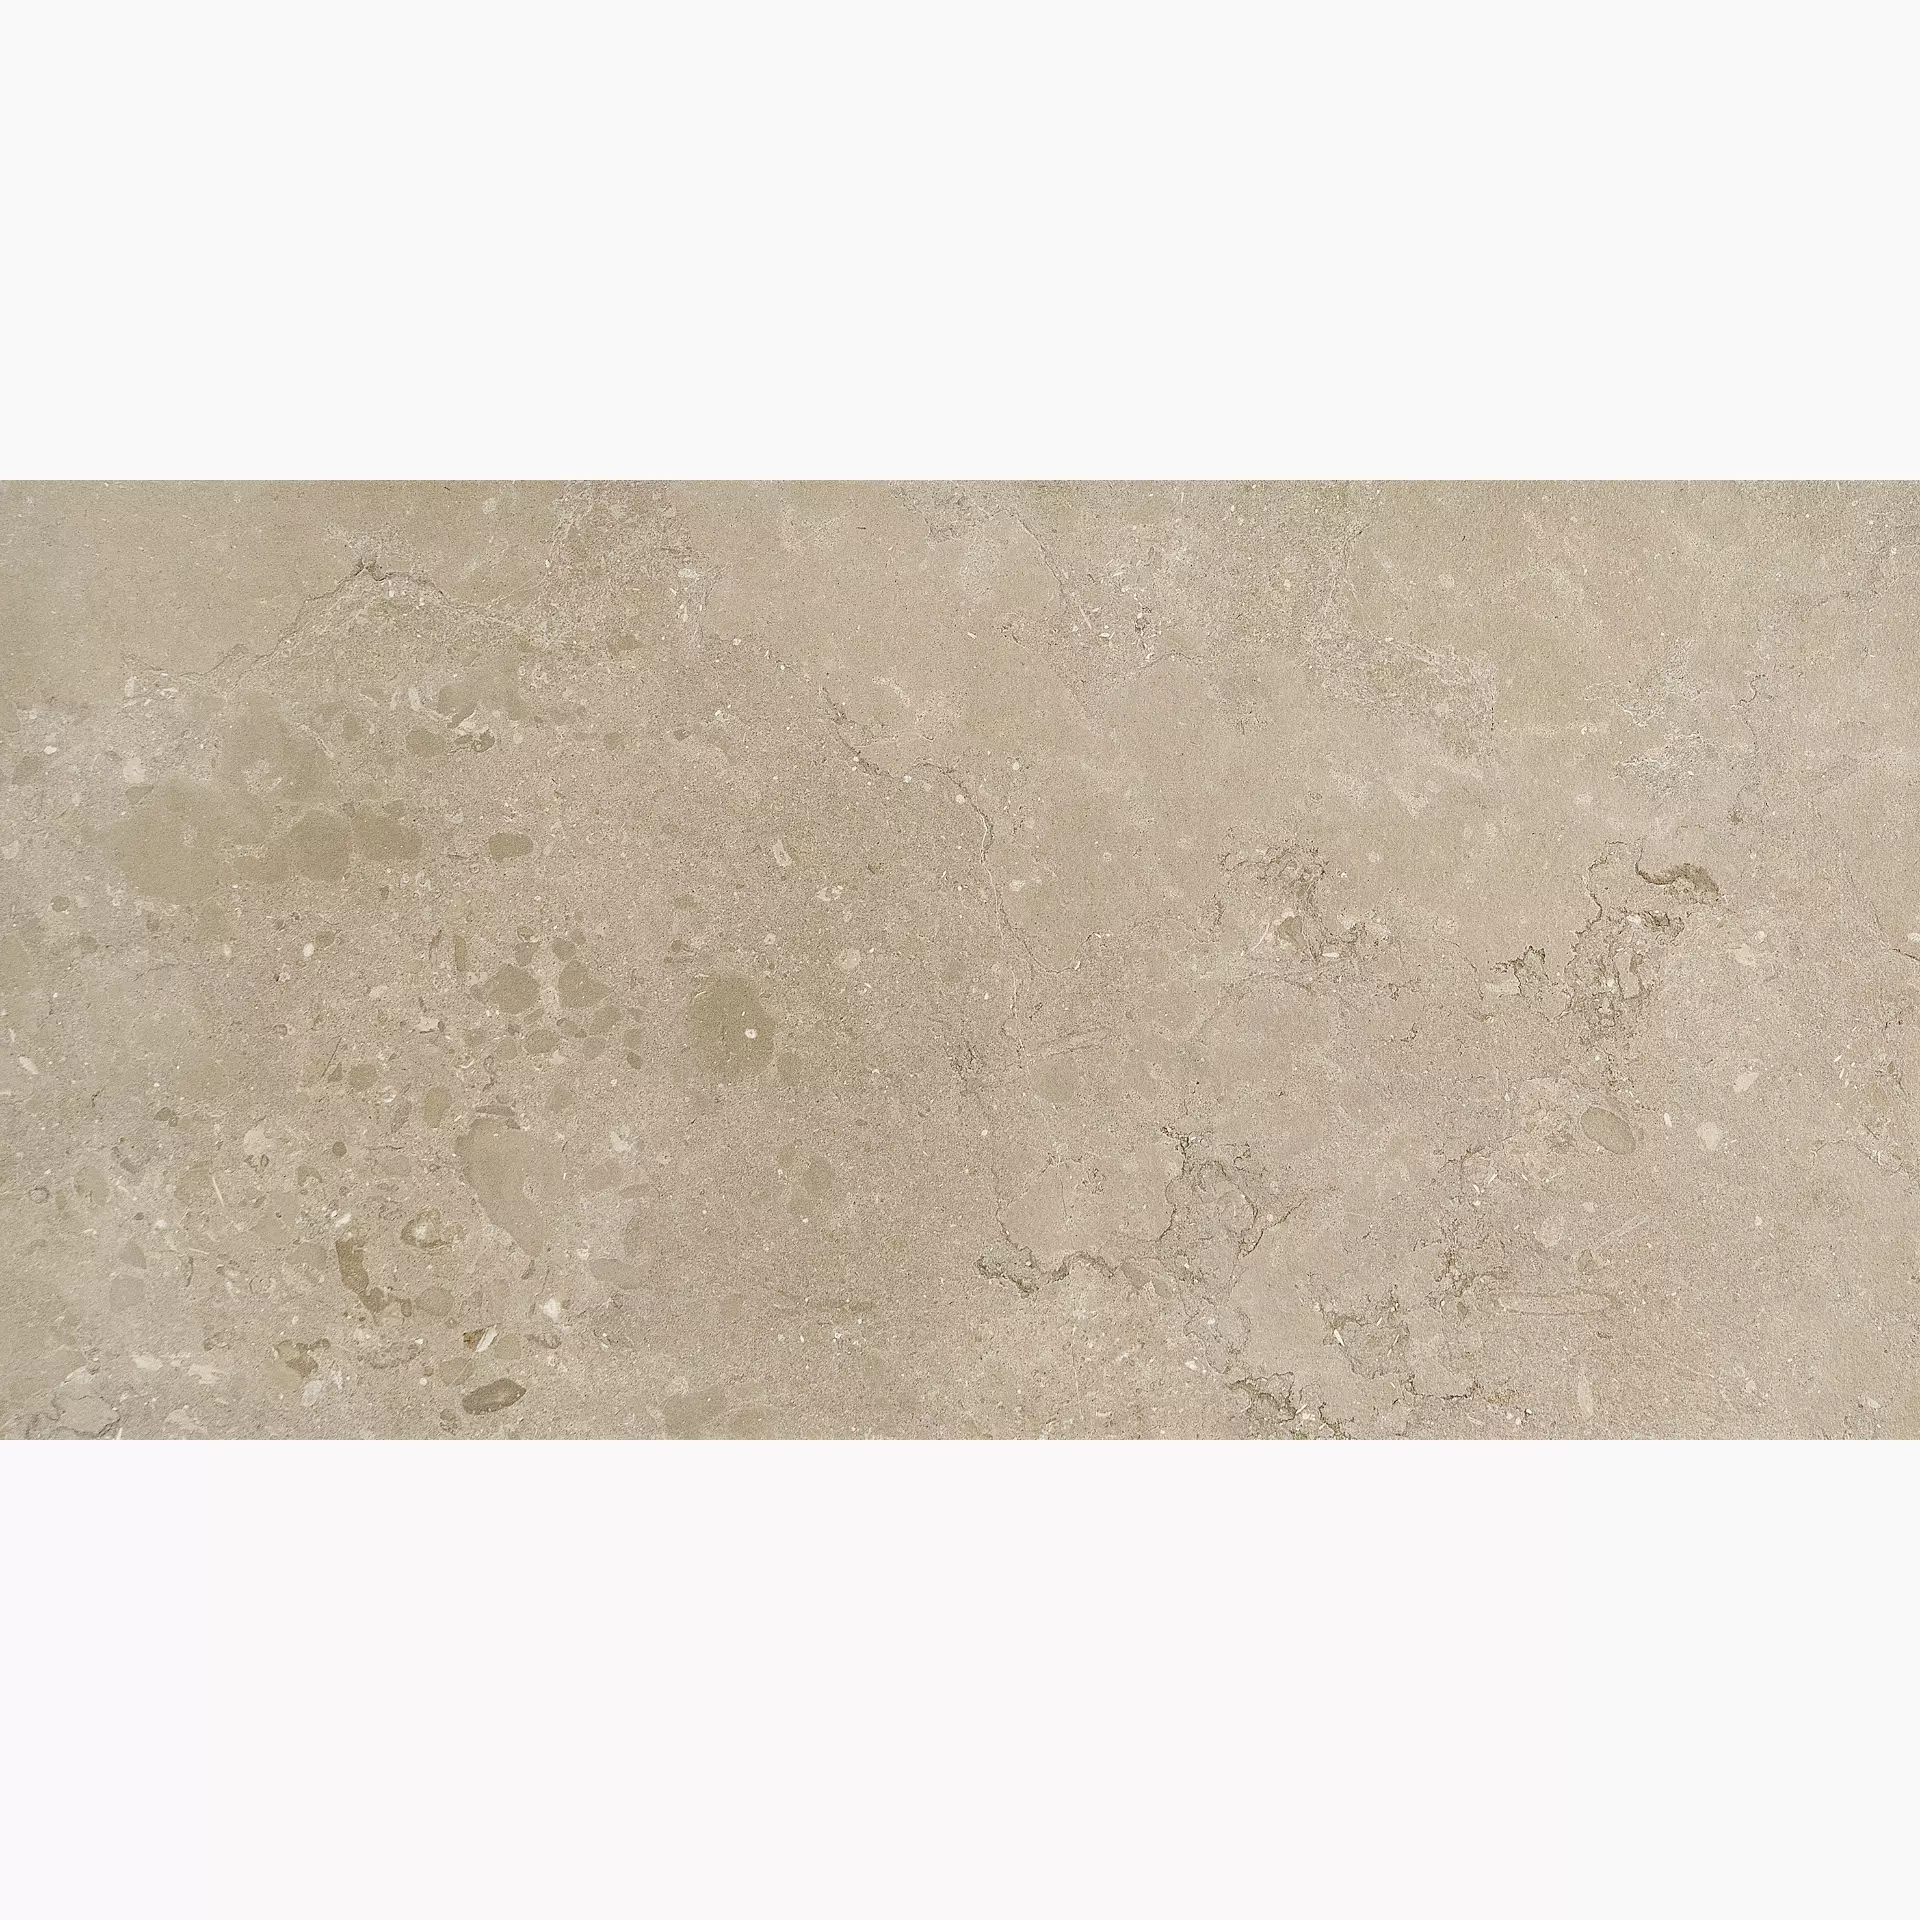 Coem Lagos Sand Naturale 0OS362R 30x60cm rectified 9mm